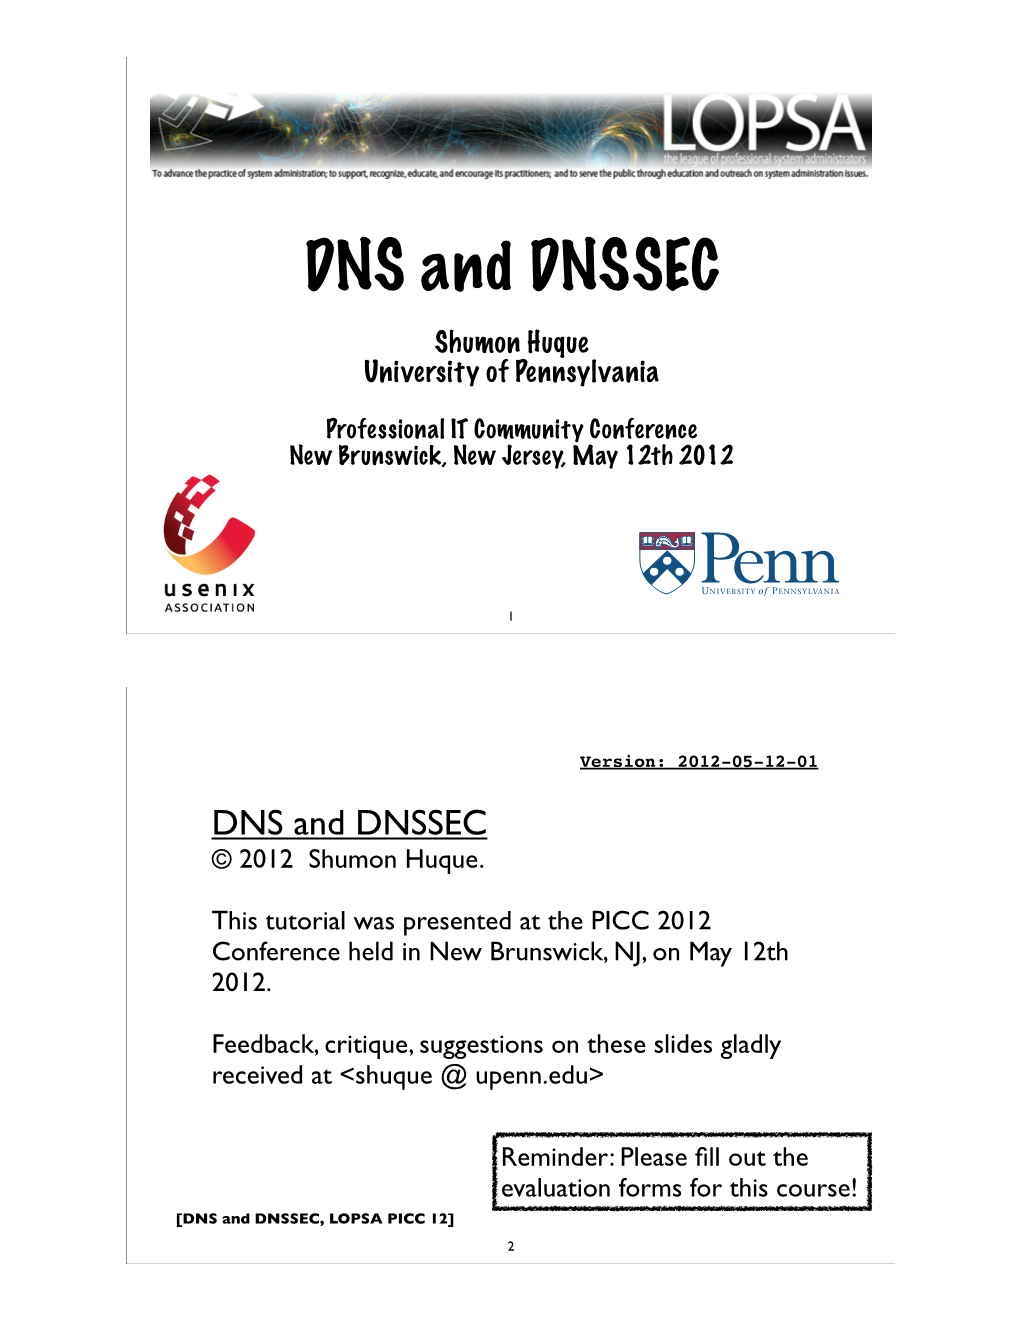 DNS and DNSSEC Tutorial